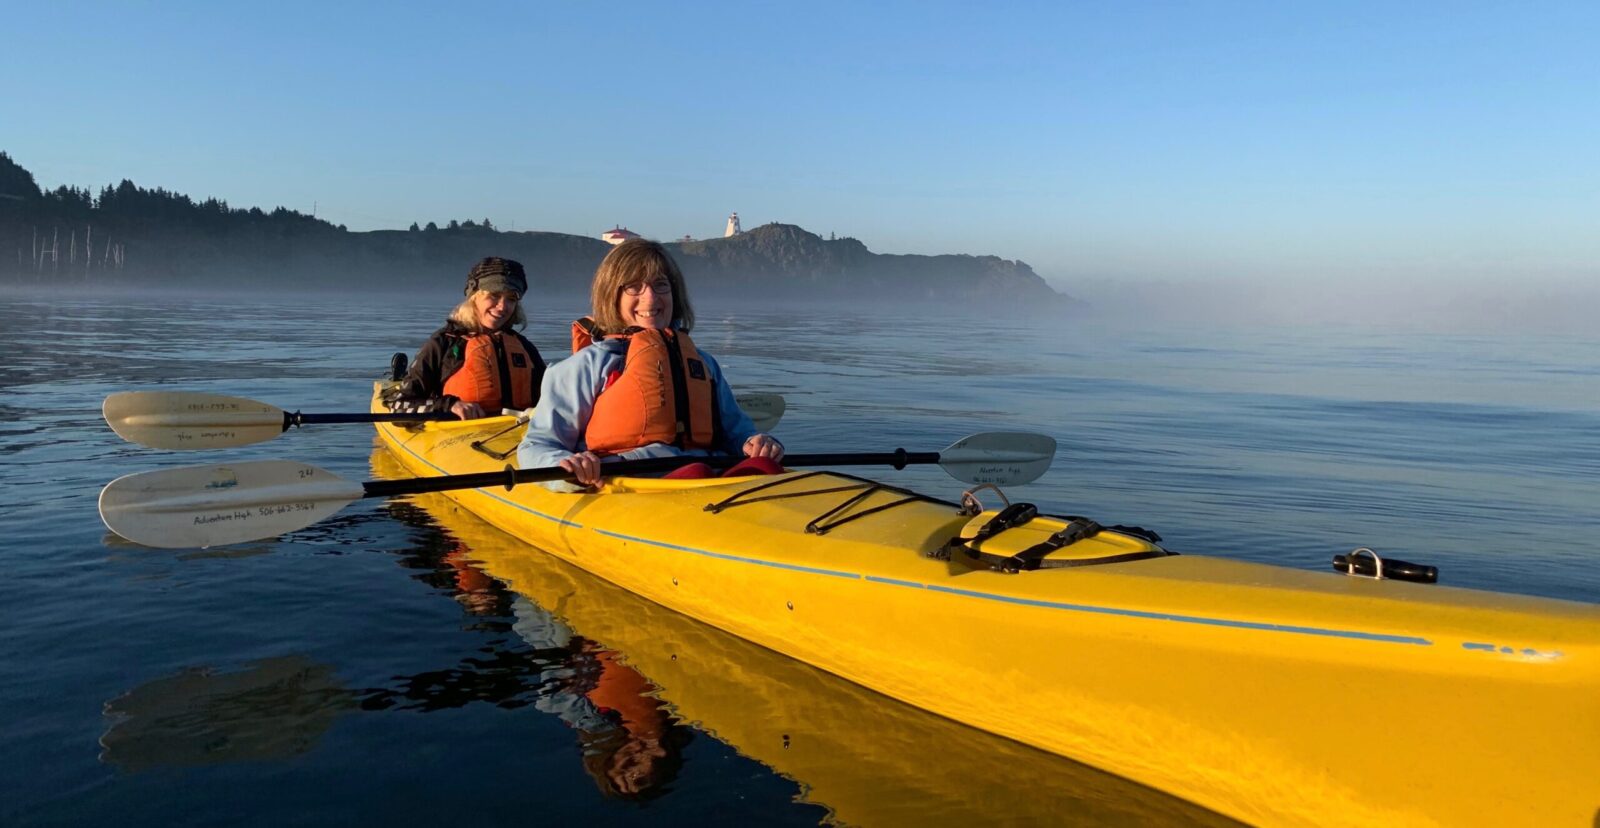 Two people paddling in a yellow kayak on the water.